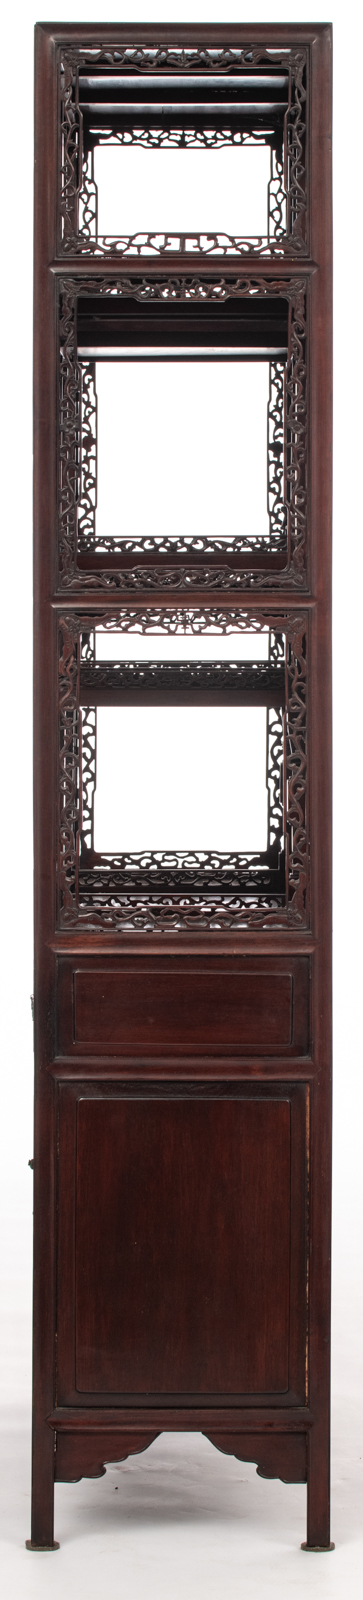 A fine Chinese rosewood display cabinet, decorated with richly carved openwork bandings and brass mo - Image 3 of 5